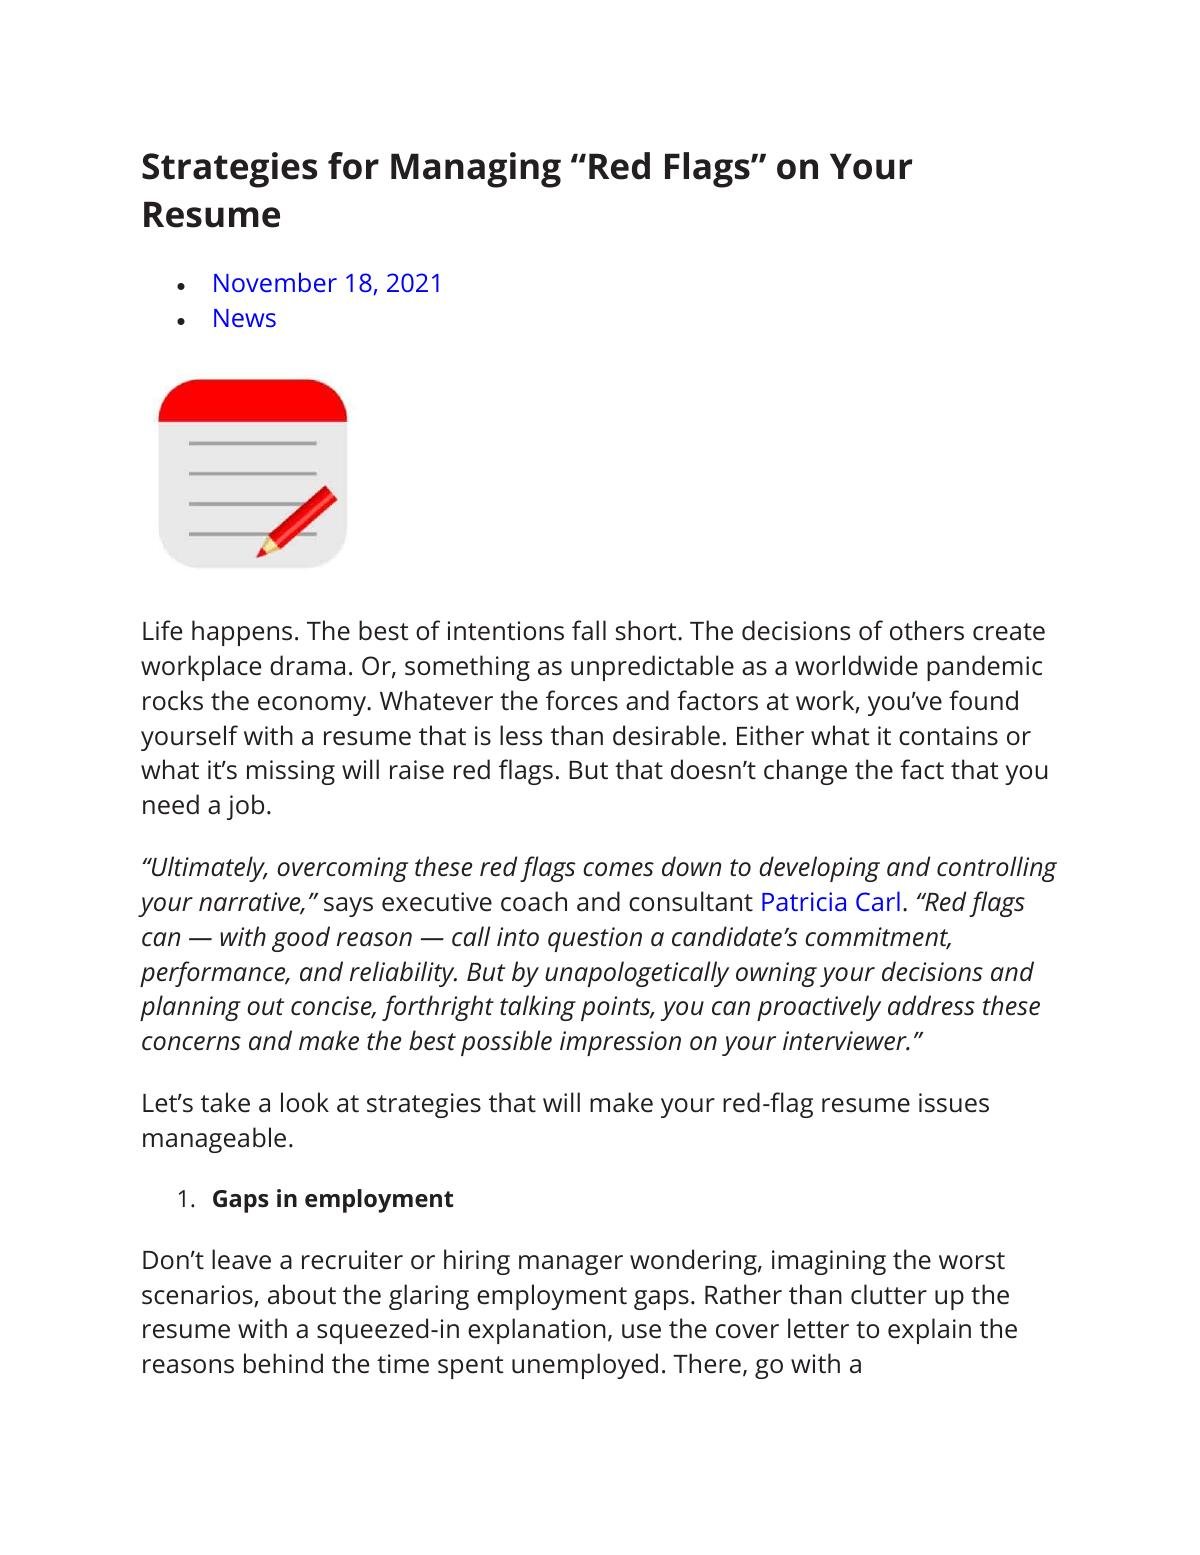 Strategies for Managing “Red Flags” on Your Resume